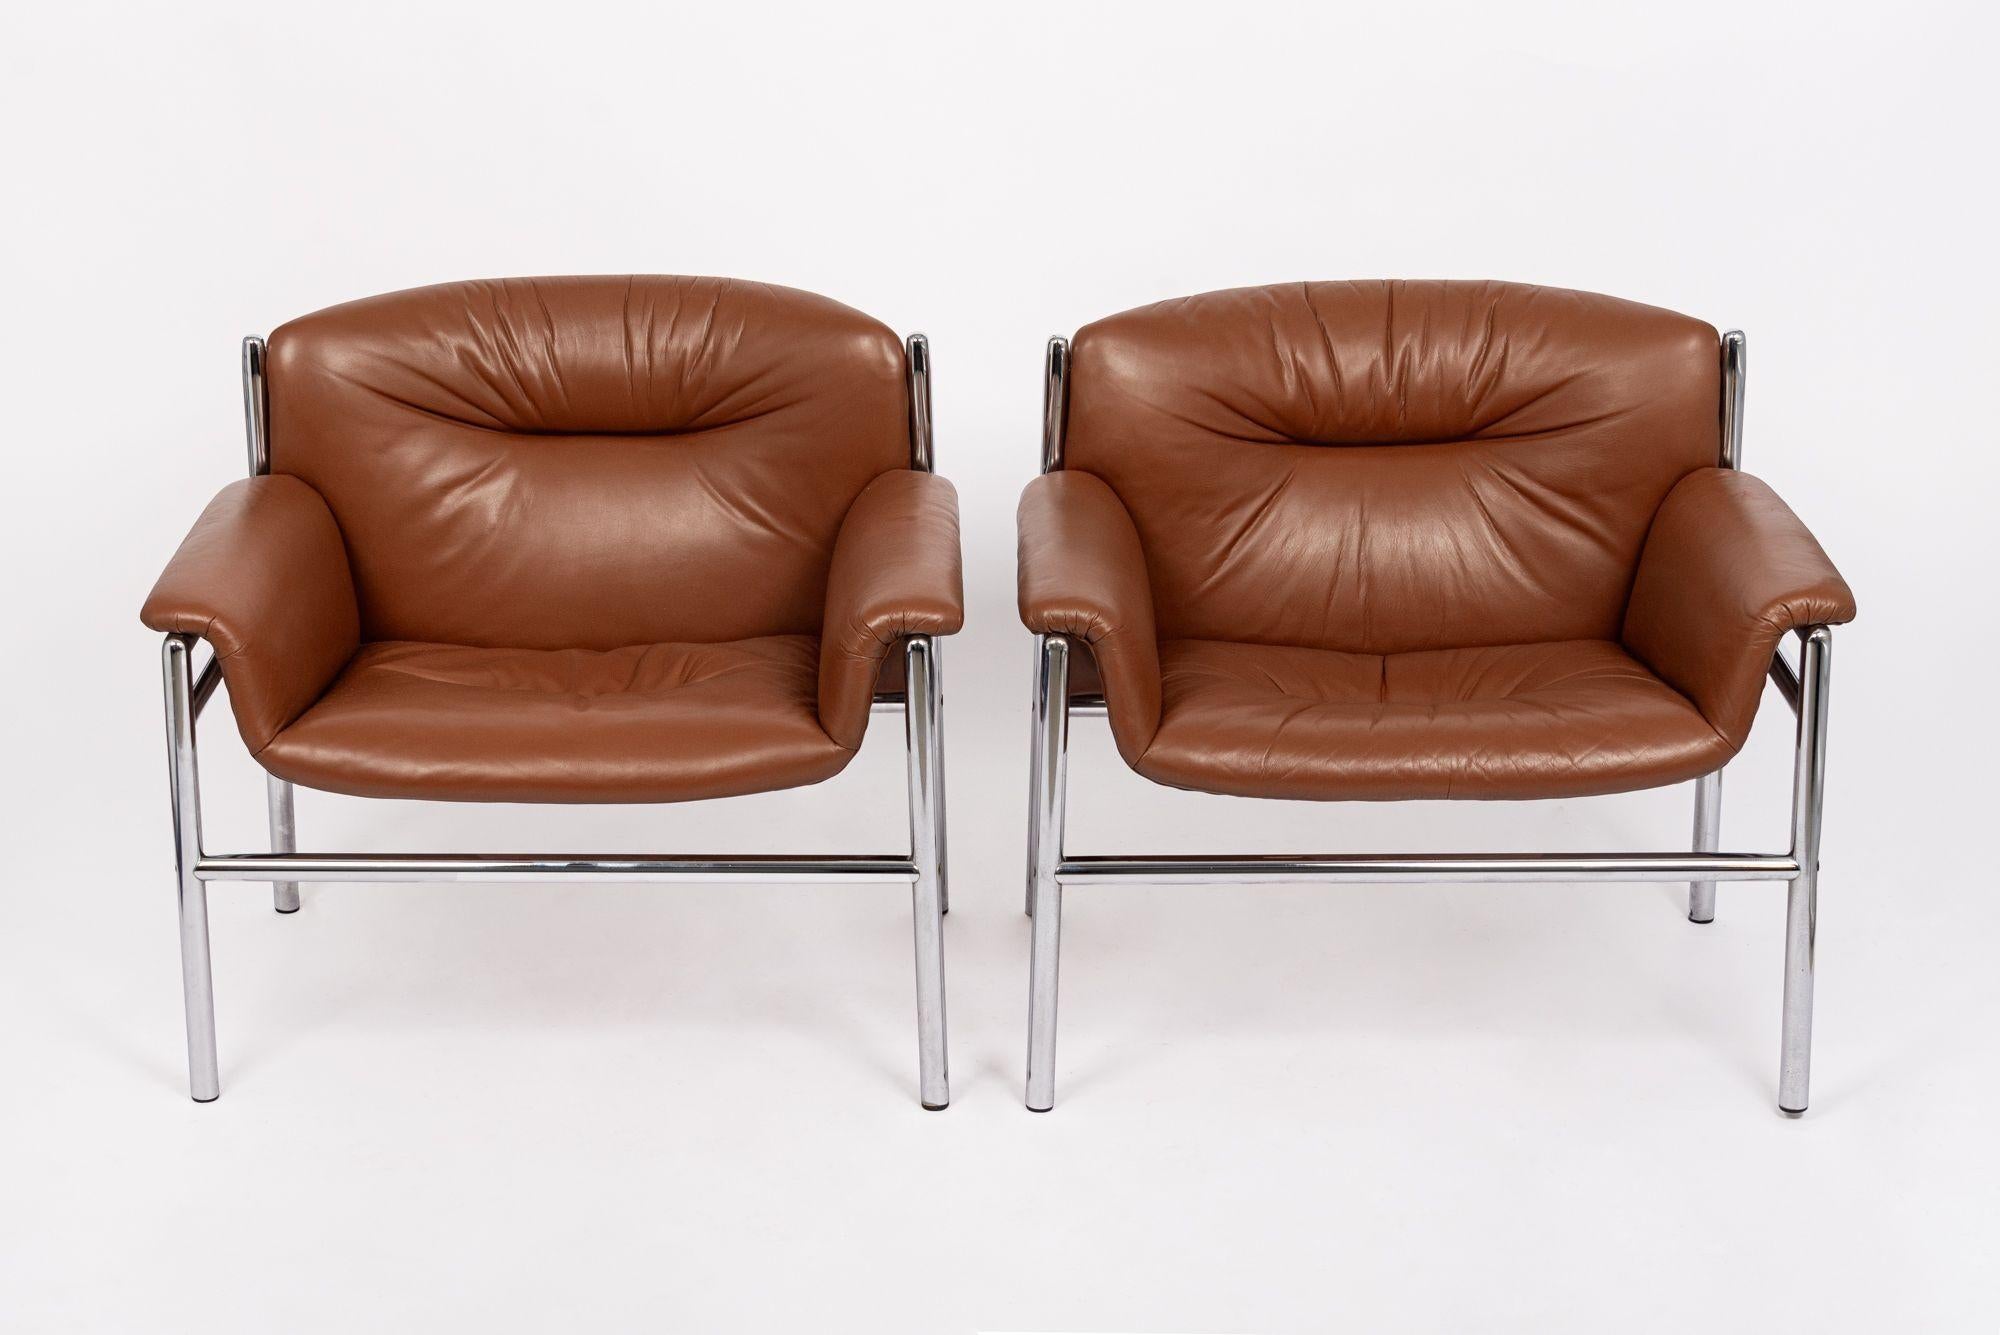 This stunning pair of vintage mid century modern lounge chairs were produced by Stendig circa 1960. These matching lounge chairs are exceptionally well-built and feature gorgeous caramel brown leather upholstery, extra wide seats and double-filled